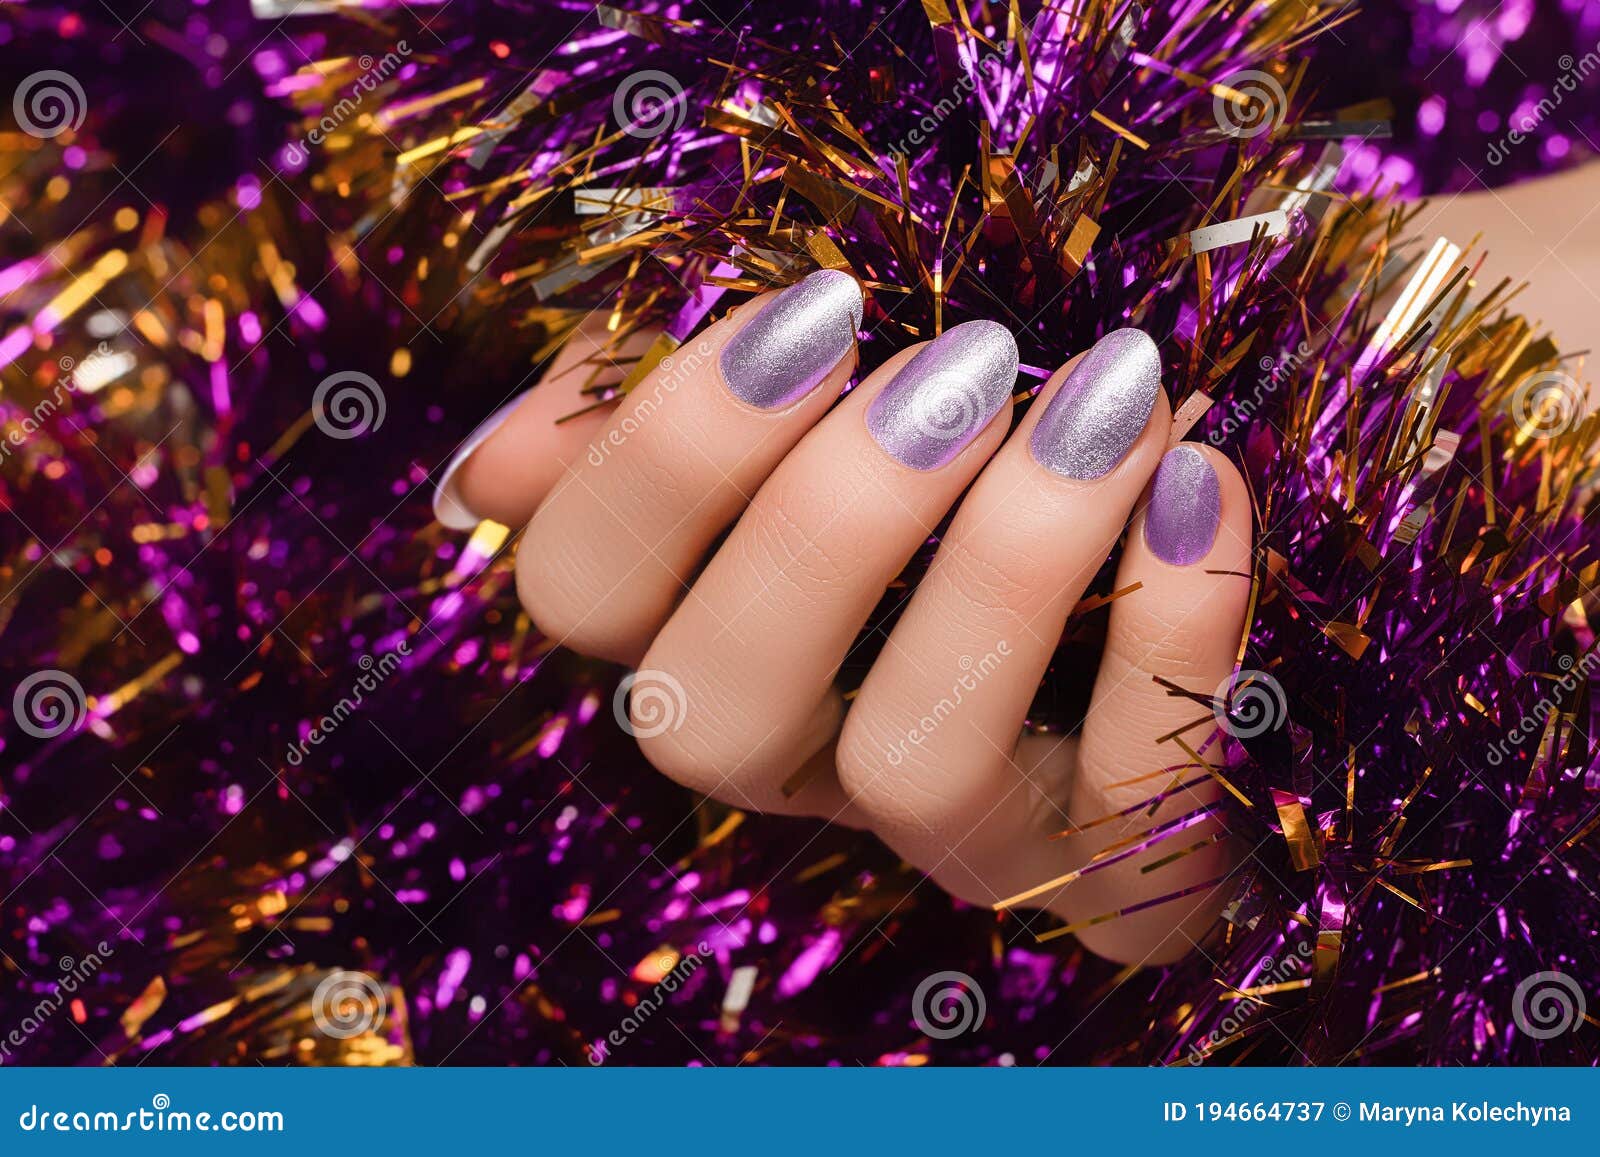 Female Hand with Silver Christmas Nail Design. Silver Nail Polish Manicure.  Female Hand Holding Purple New Year Tinsel Stock Image - Image of gift,  winter: 194664737